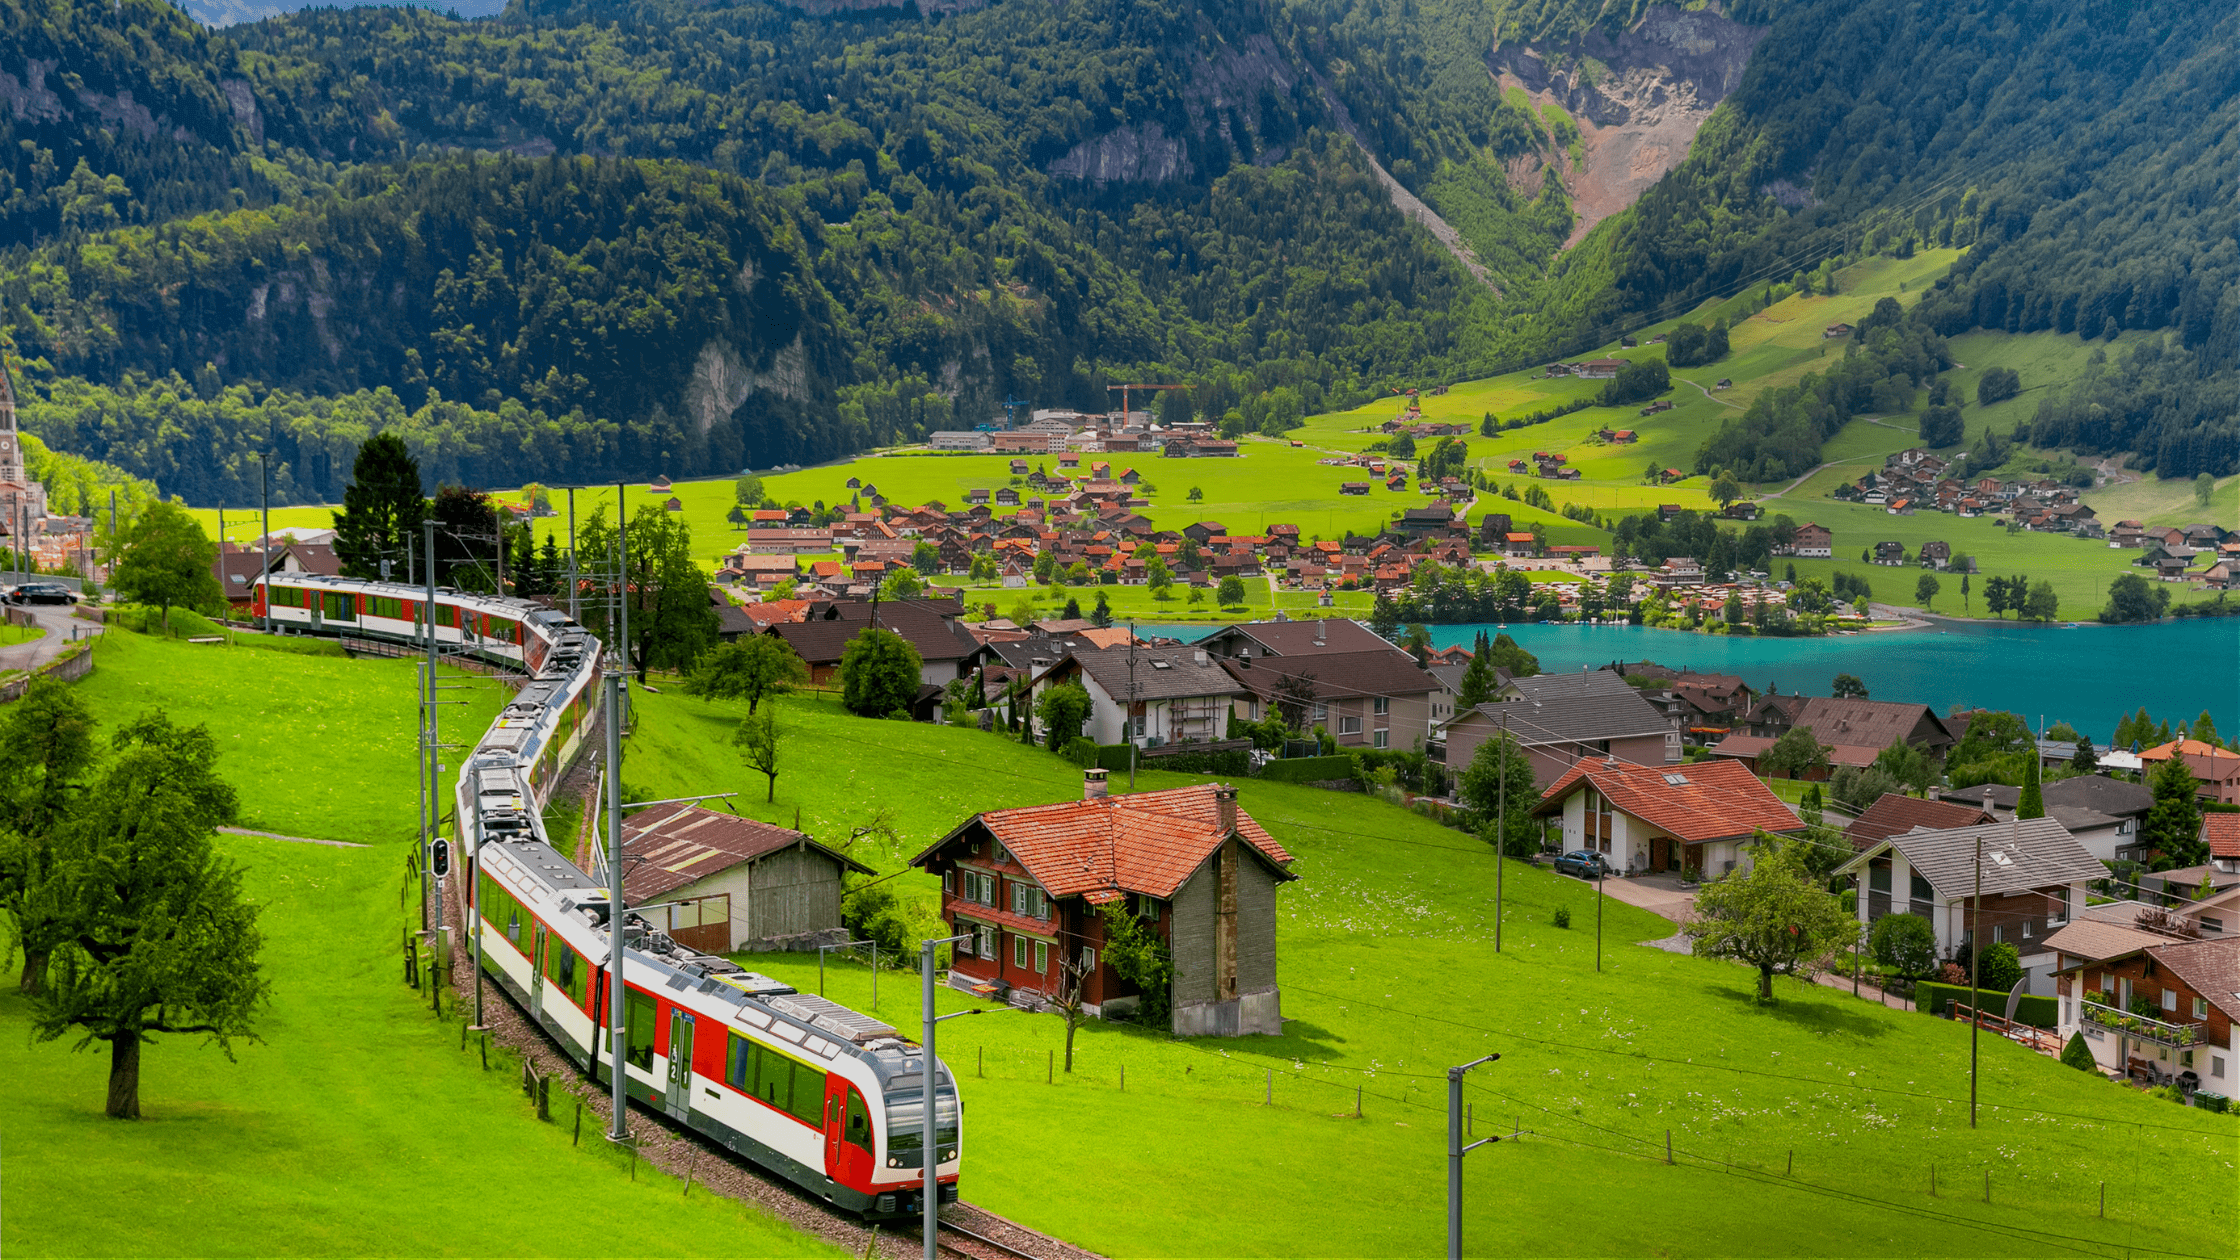 Switzerland: A Place Of Natural Beauty